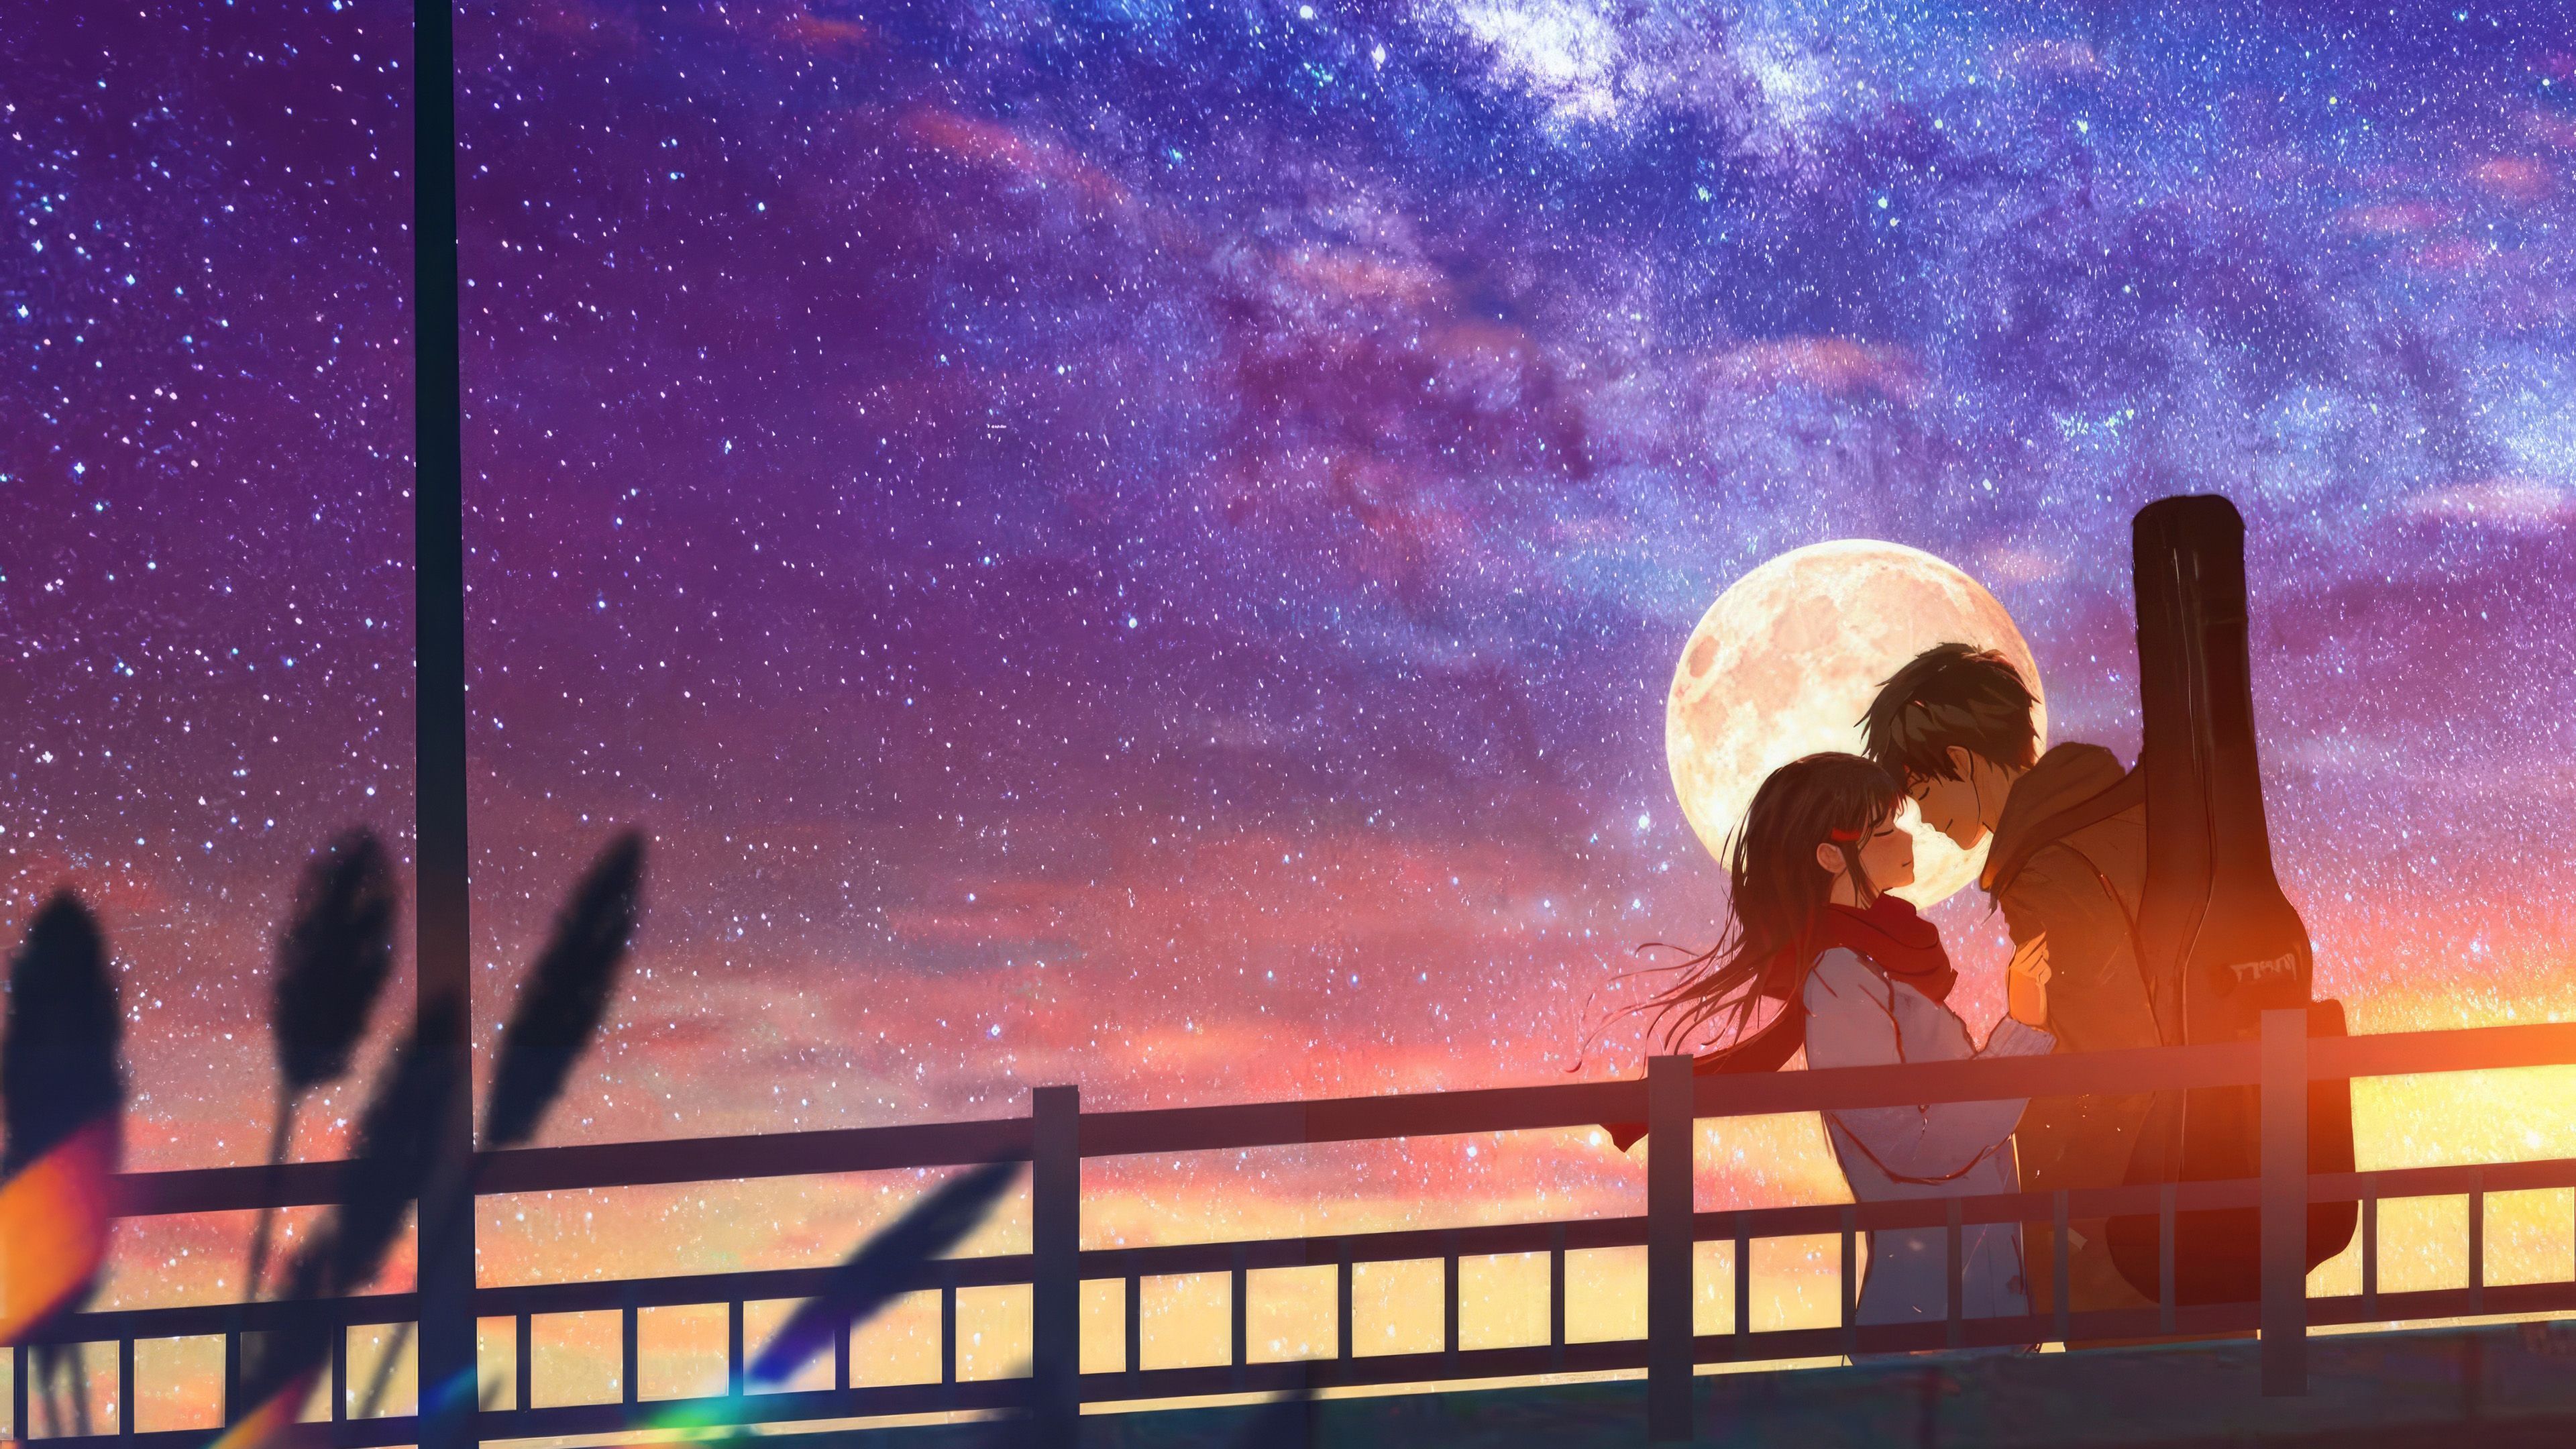 Anime Love 4k Wallpapers - Top Free Anime Love 4k Backgrounds ...